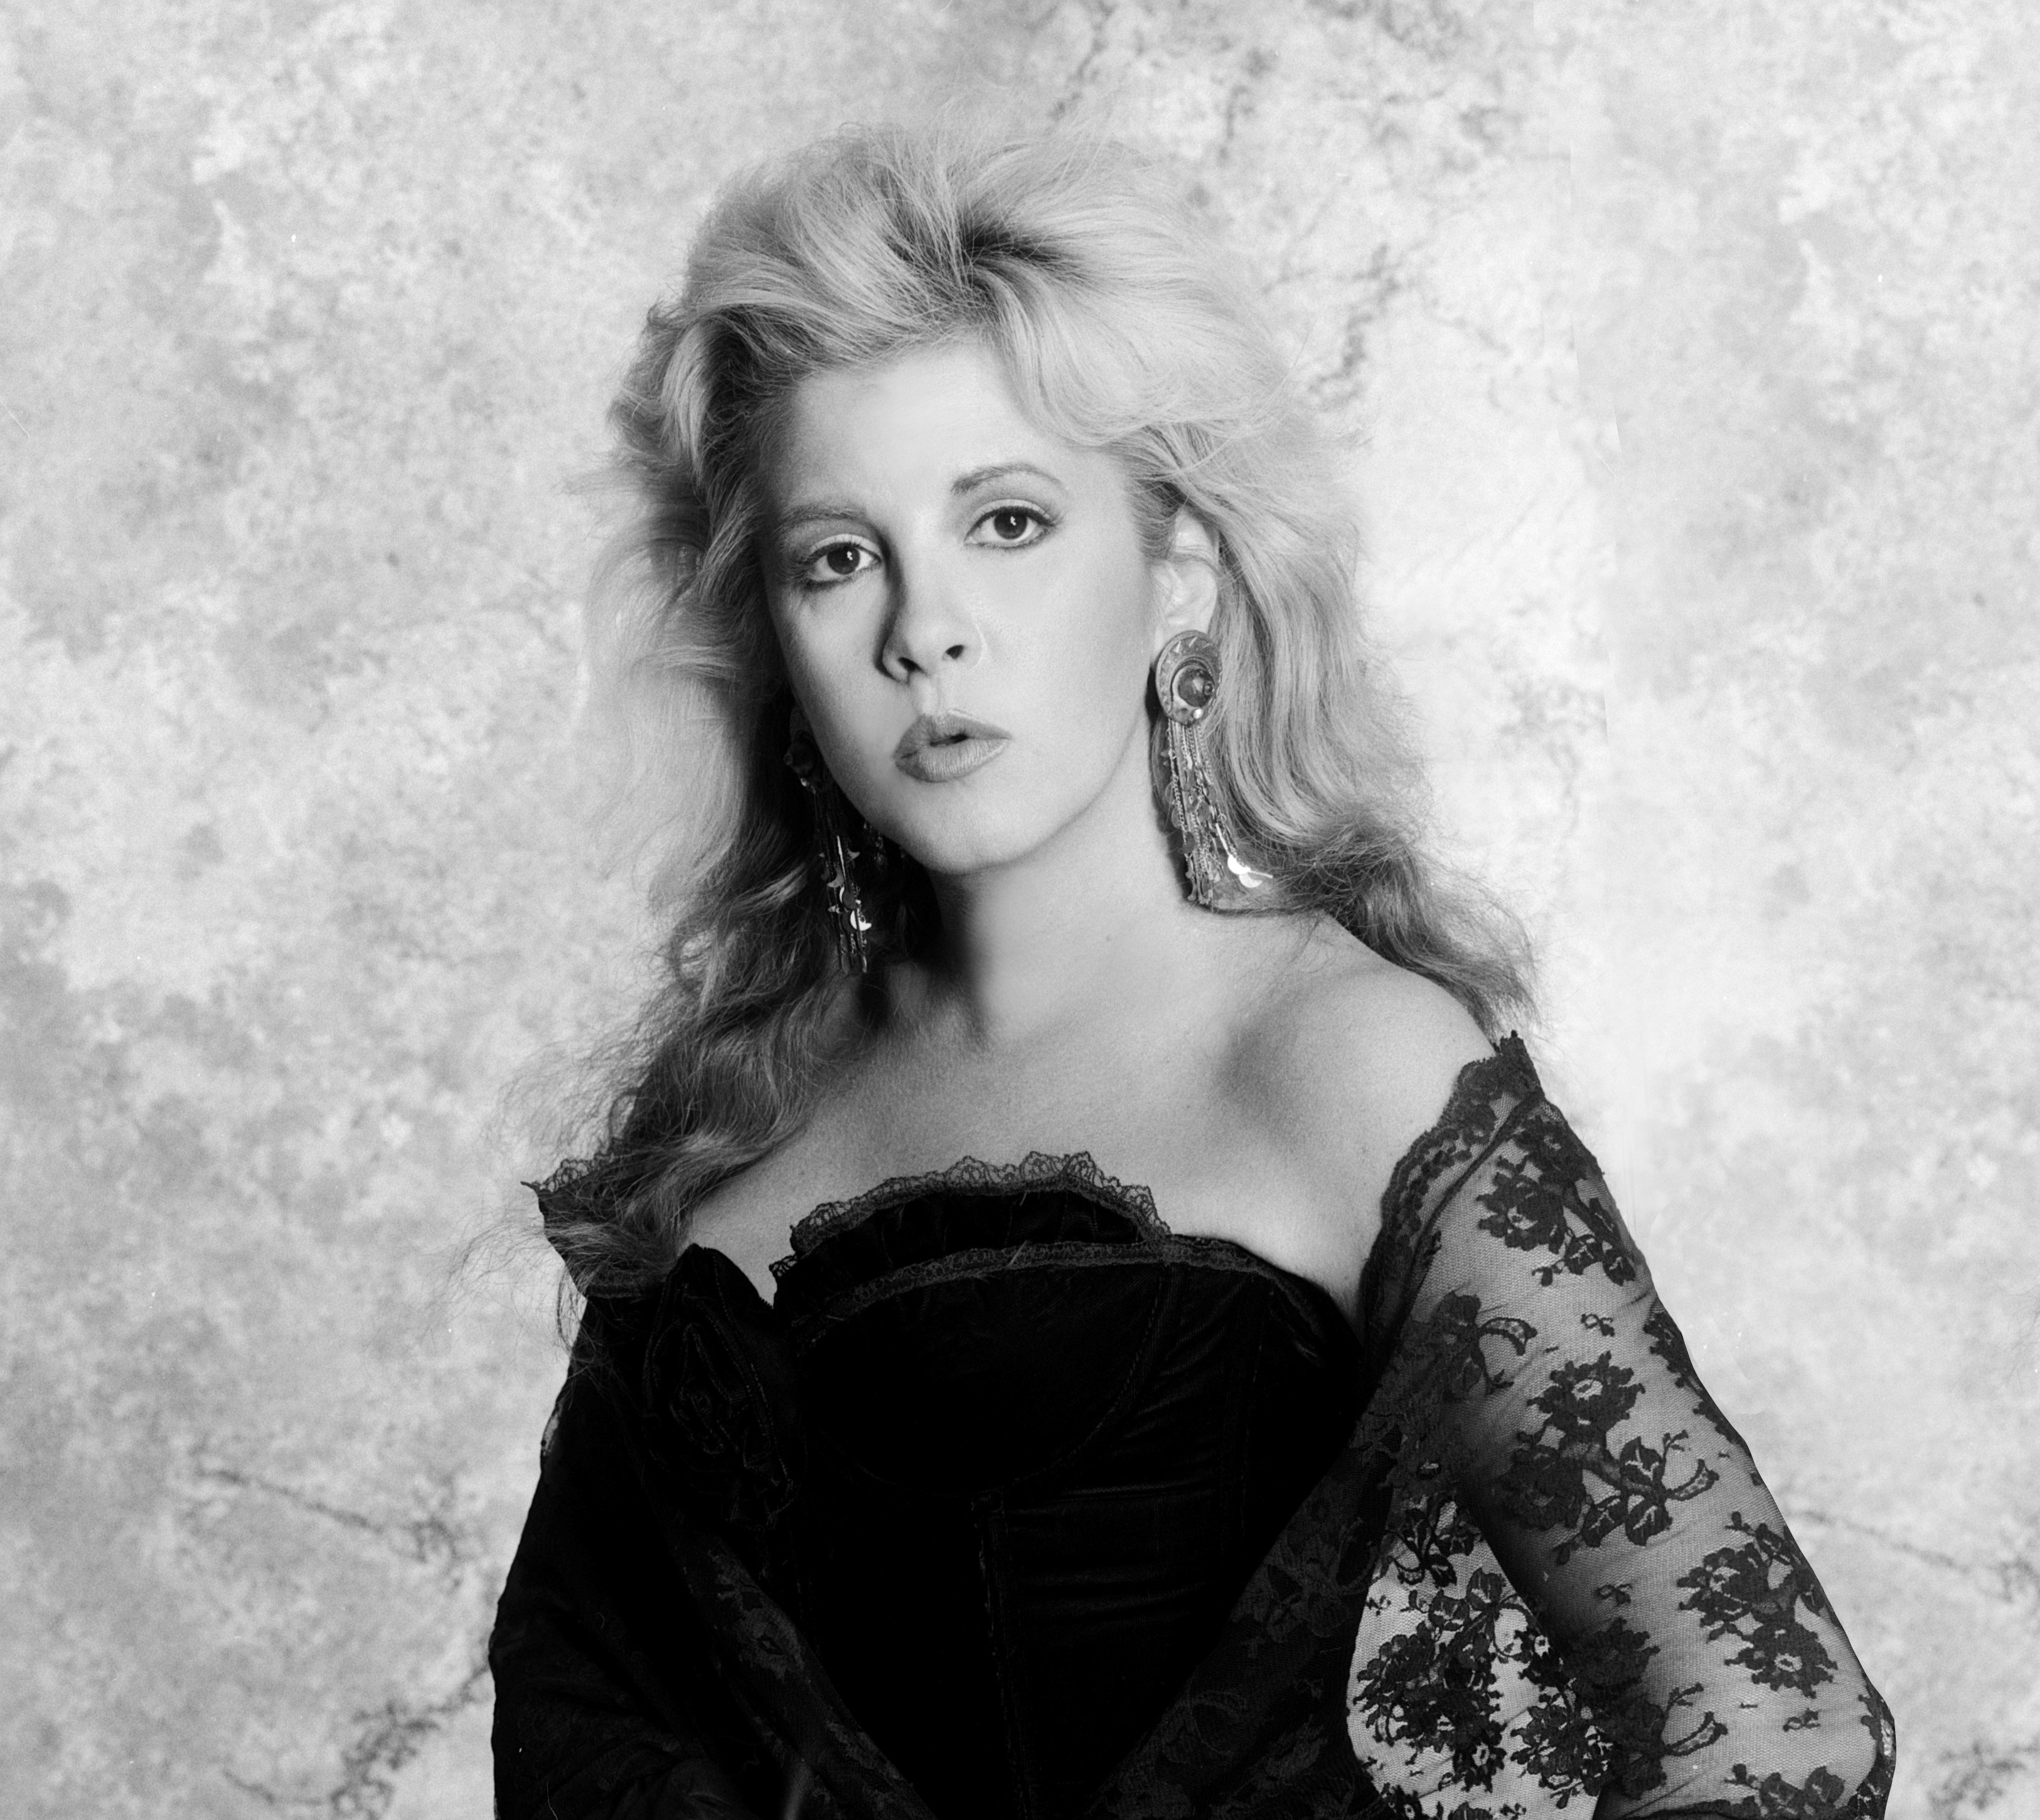 Stevie Nicks wears a black dress with lace sleeves and long earrings. 